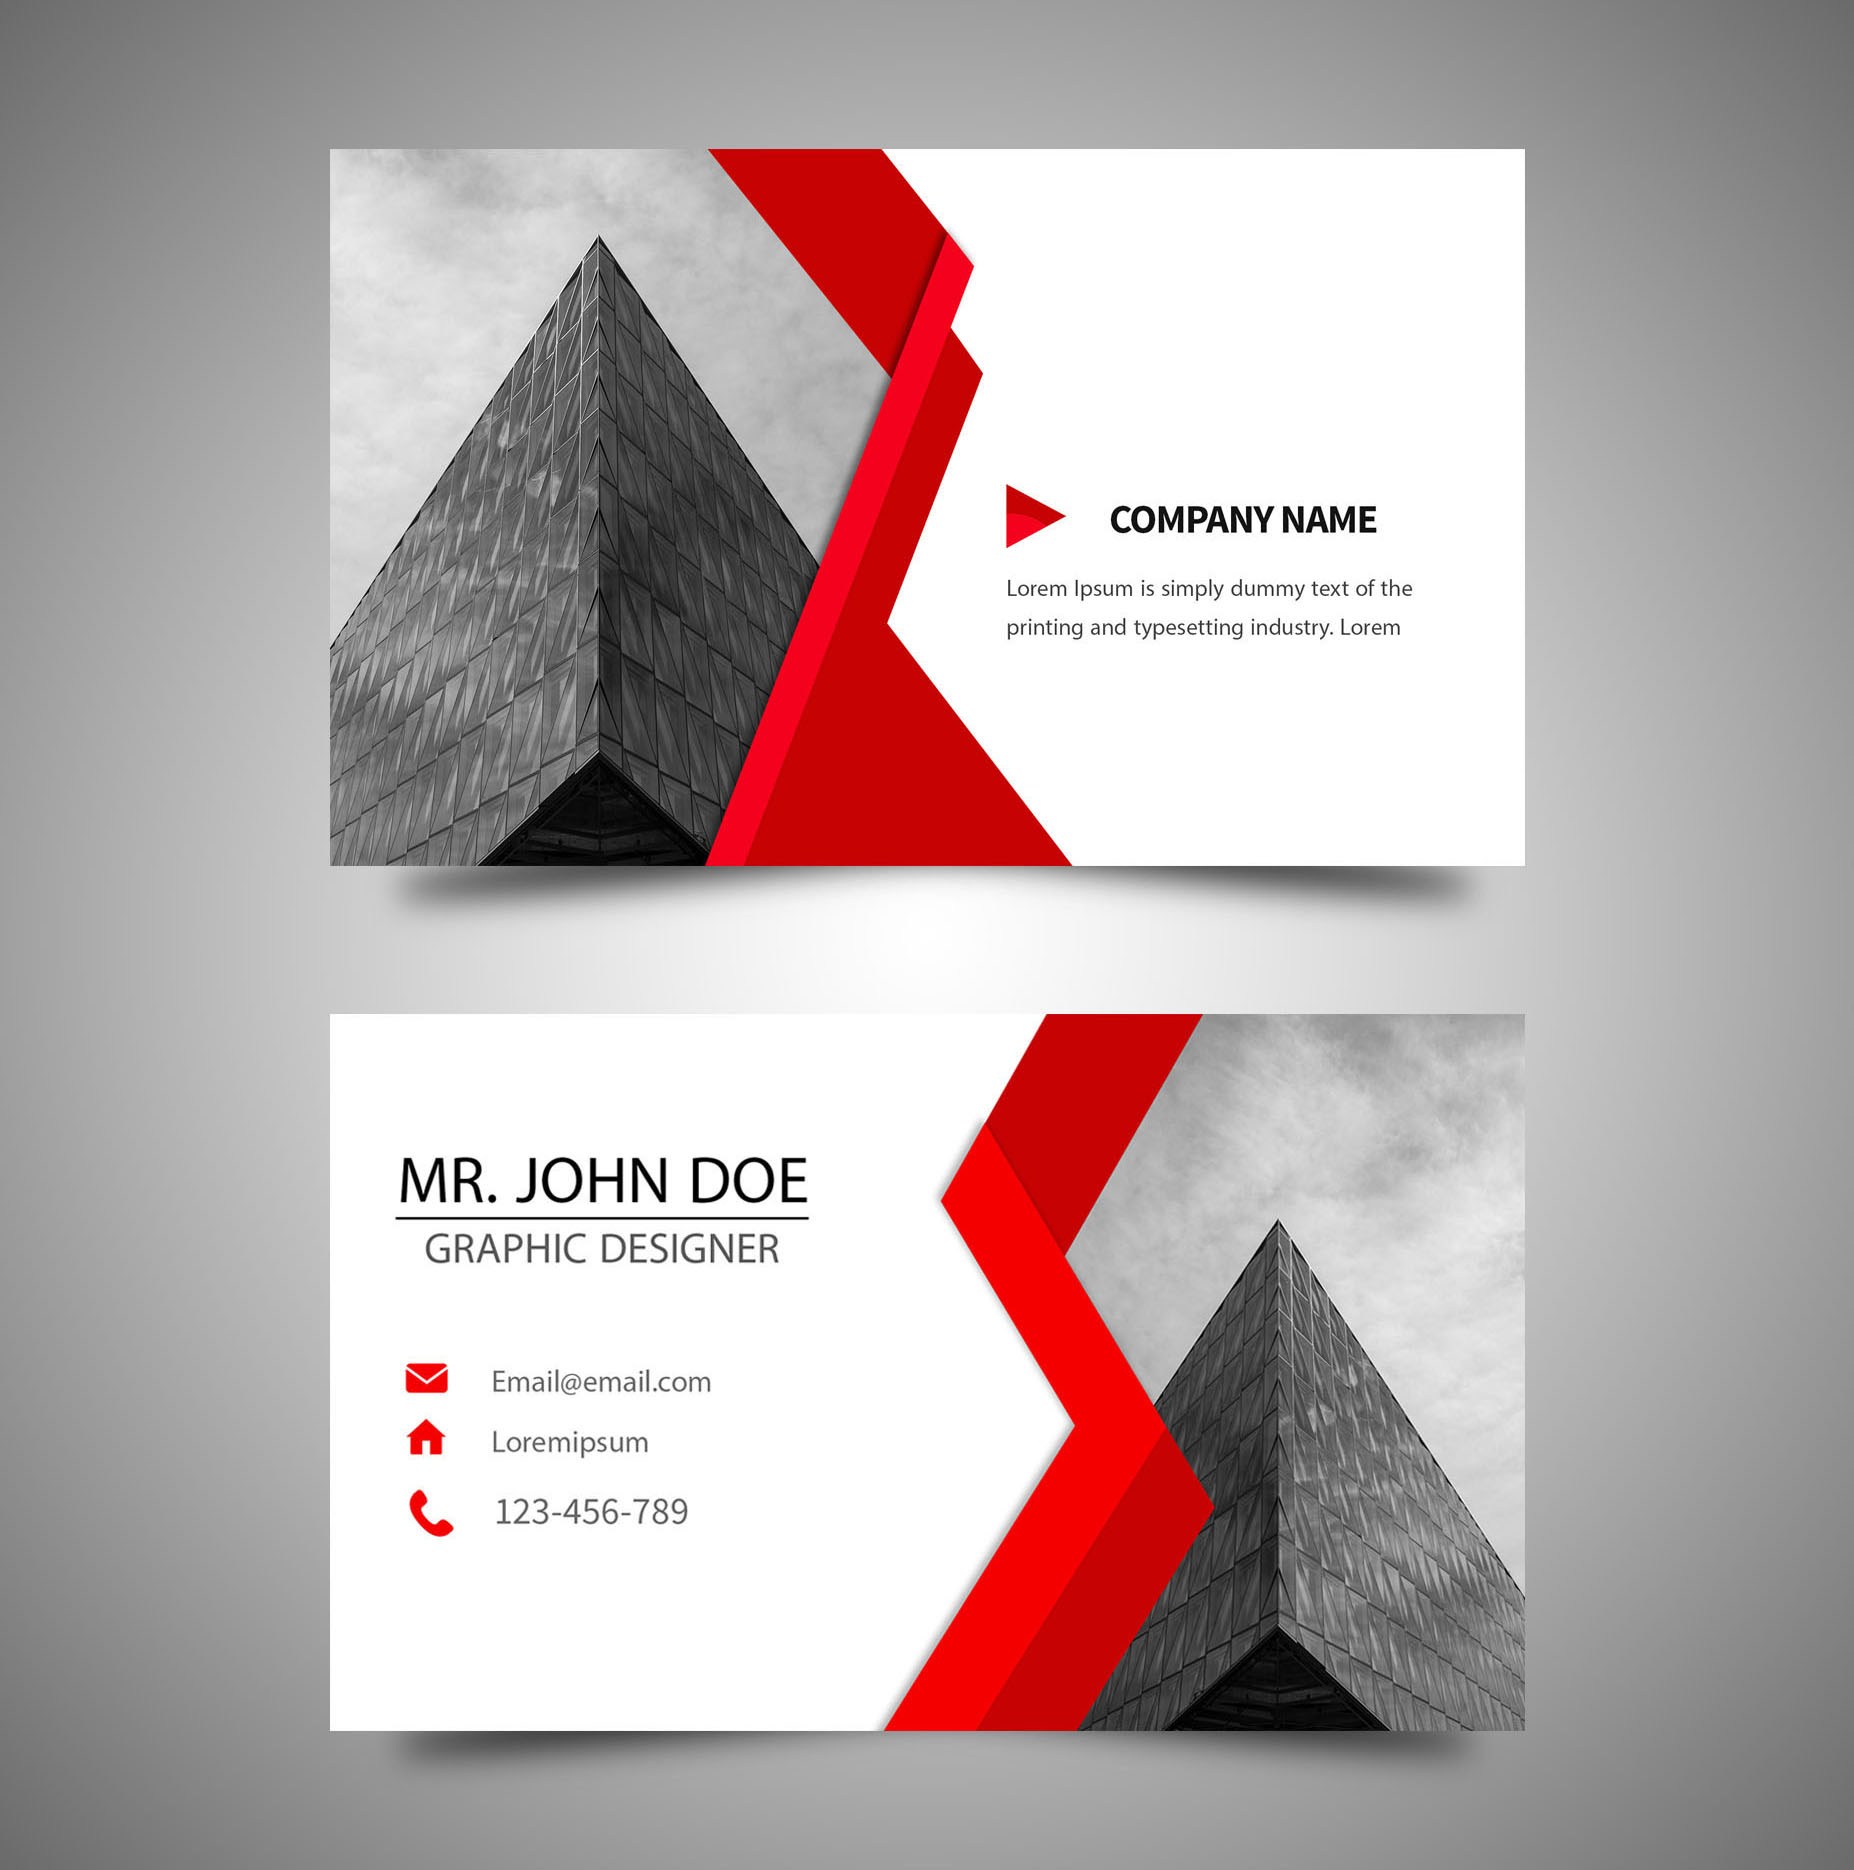 front-back-of-the-business-card